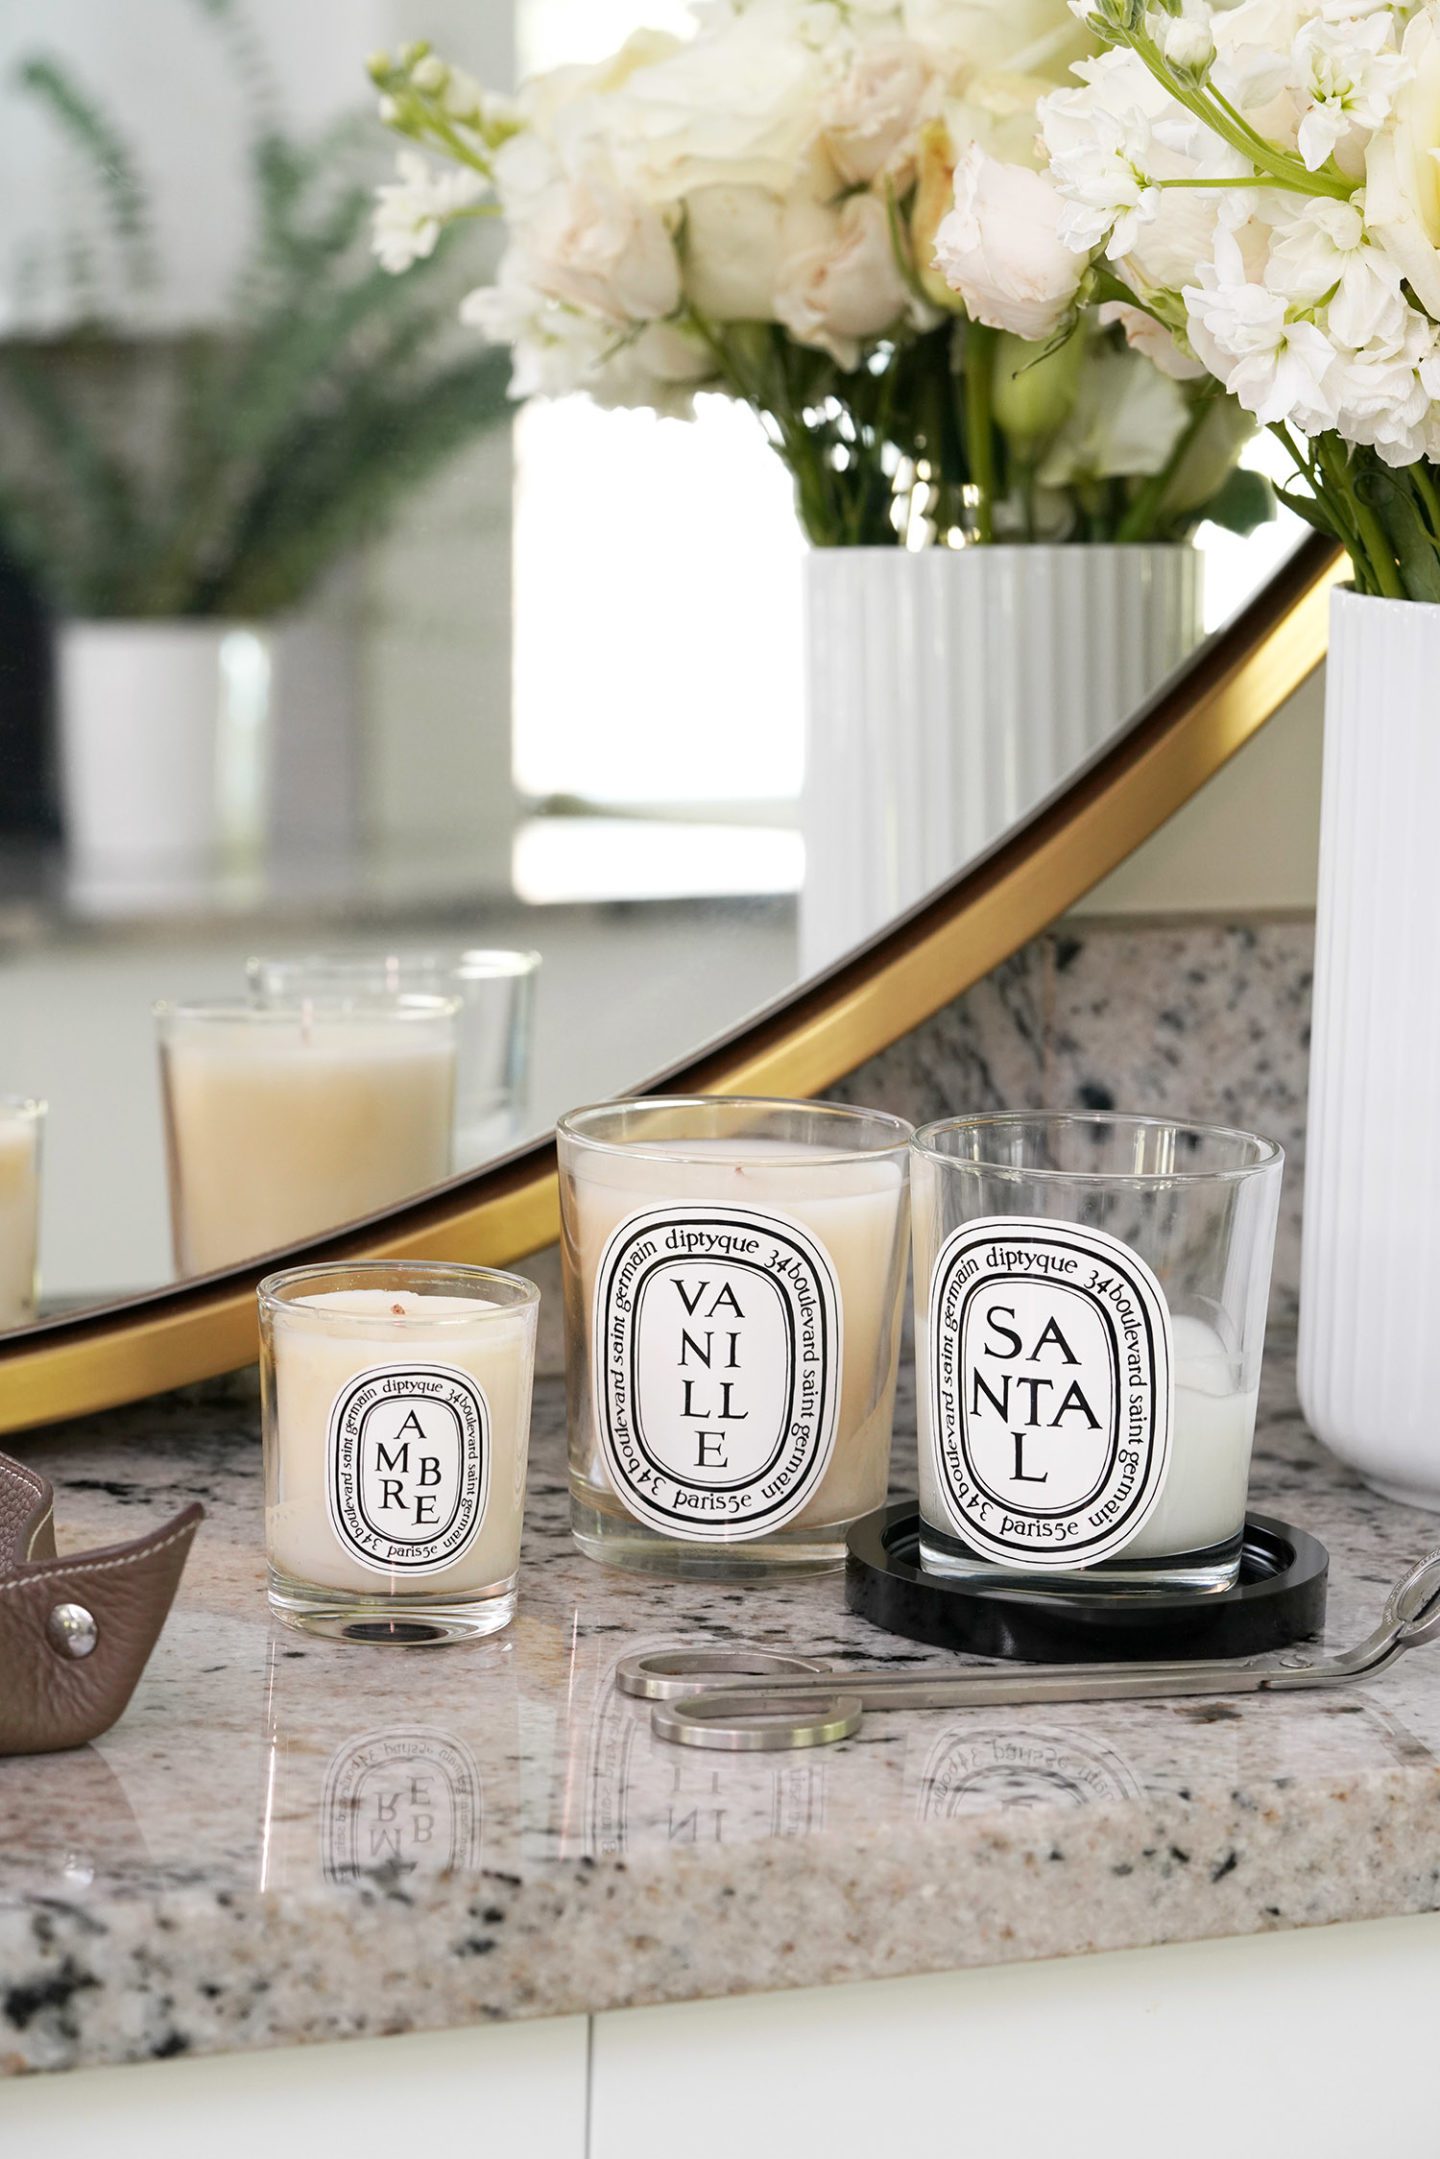 Best Diptyque Candles for Fall Ambre, Vanille and Santal